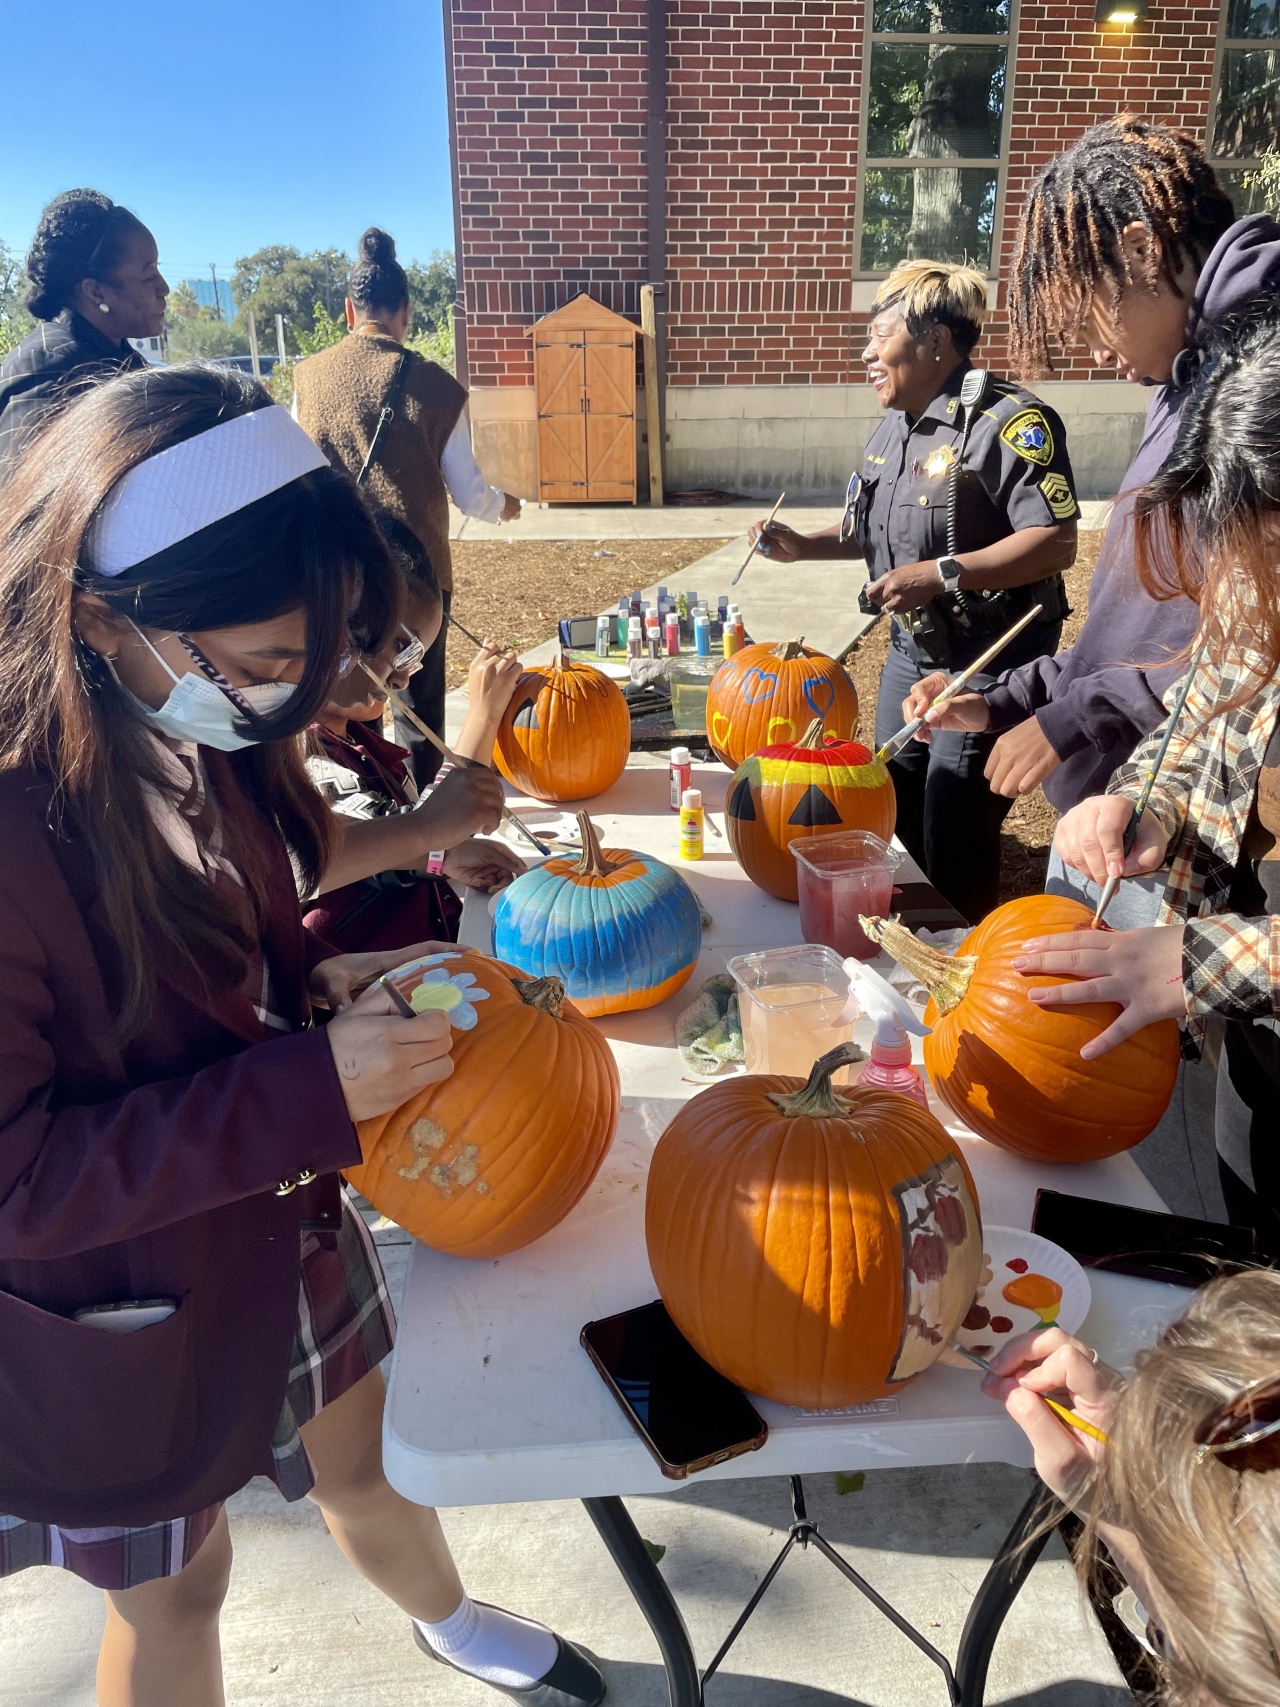 Group of high school students and police officer painting pumpkins